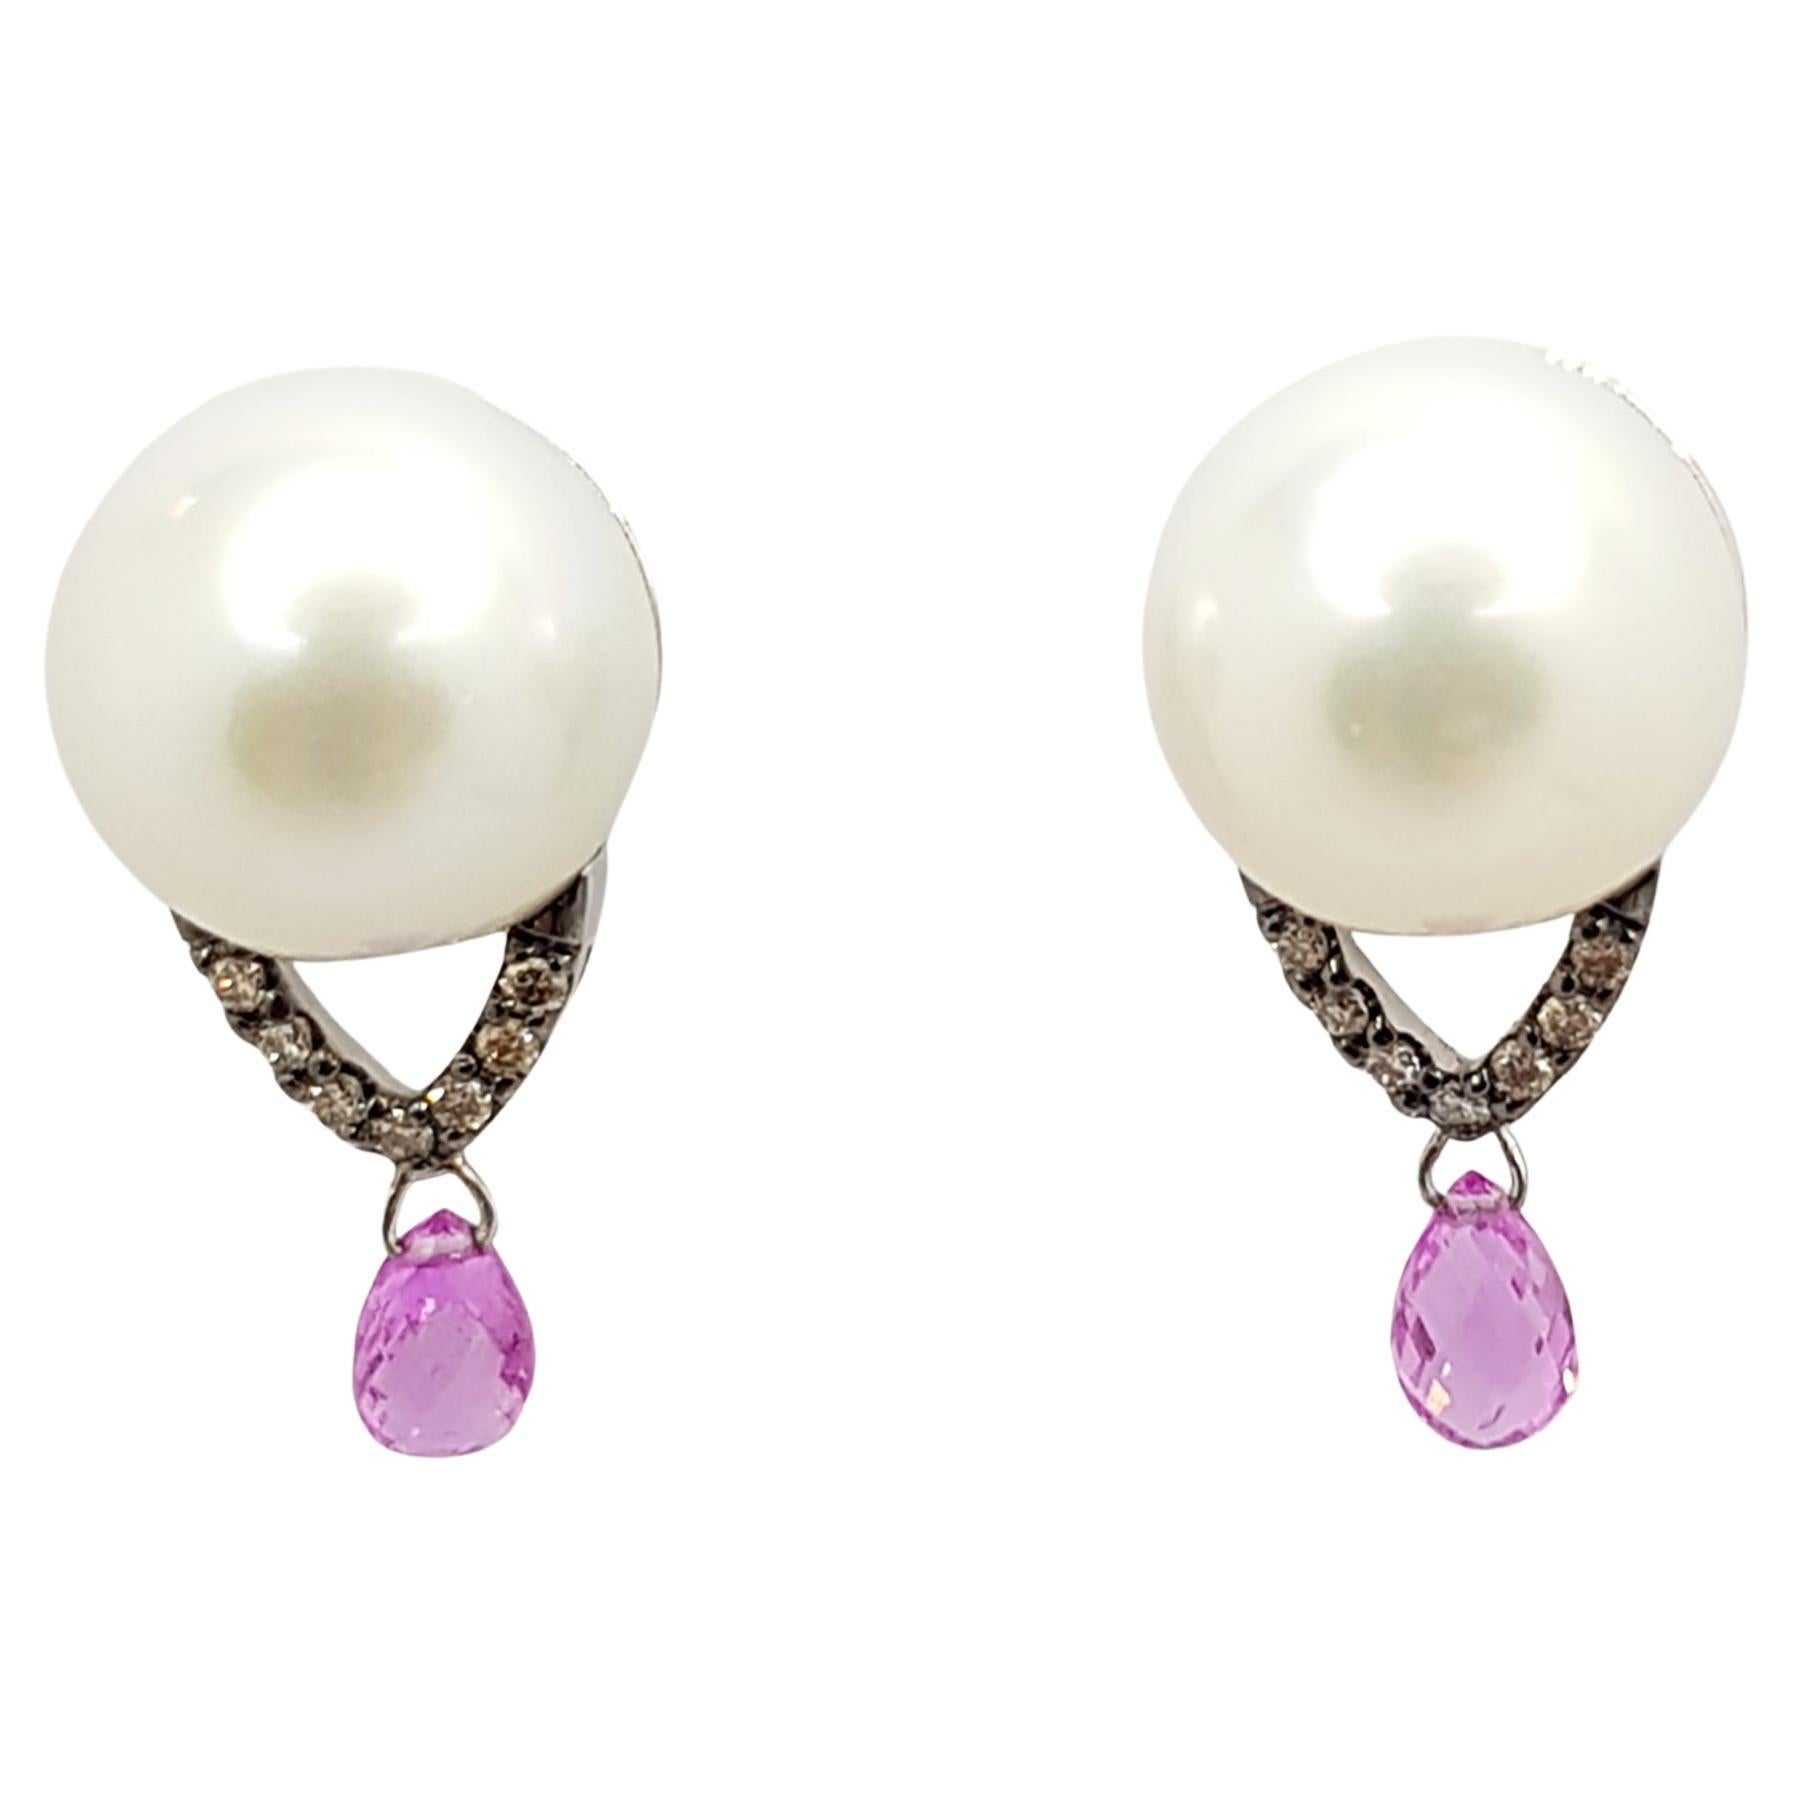 South Sea Pearl, Pink Sapphire and Brown Diamond Earrings in 18 Karat White Gold